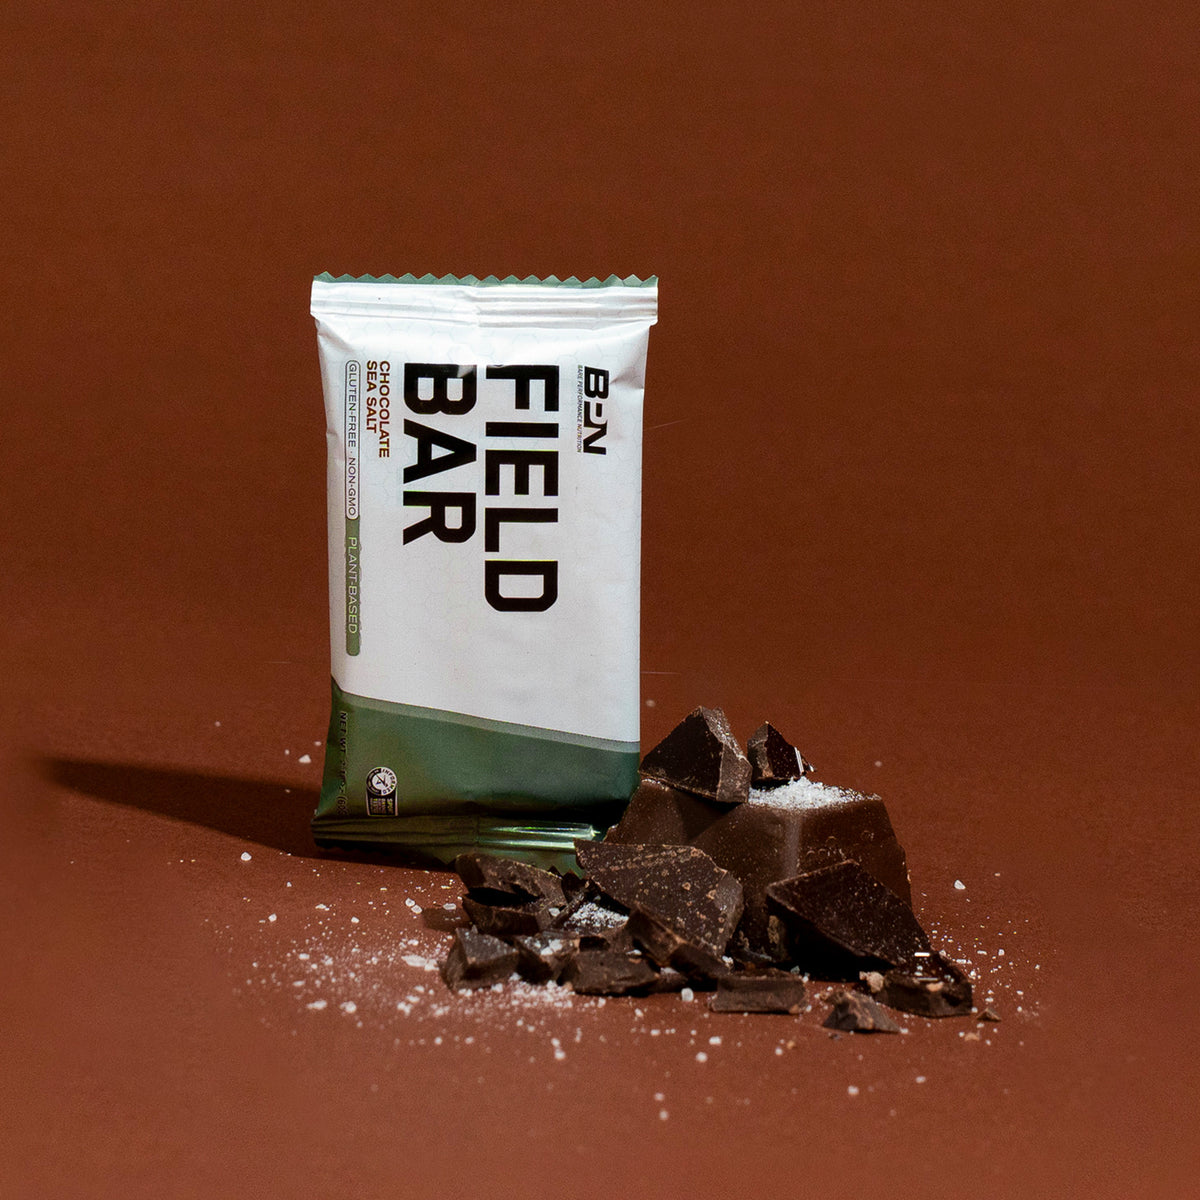 Bare Performance Nutrition Field Bar (Whey Protein)